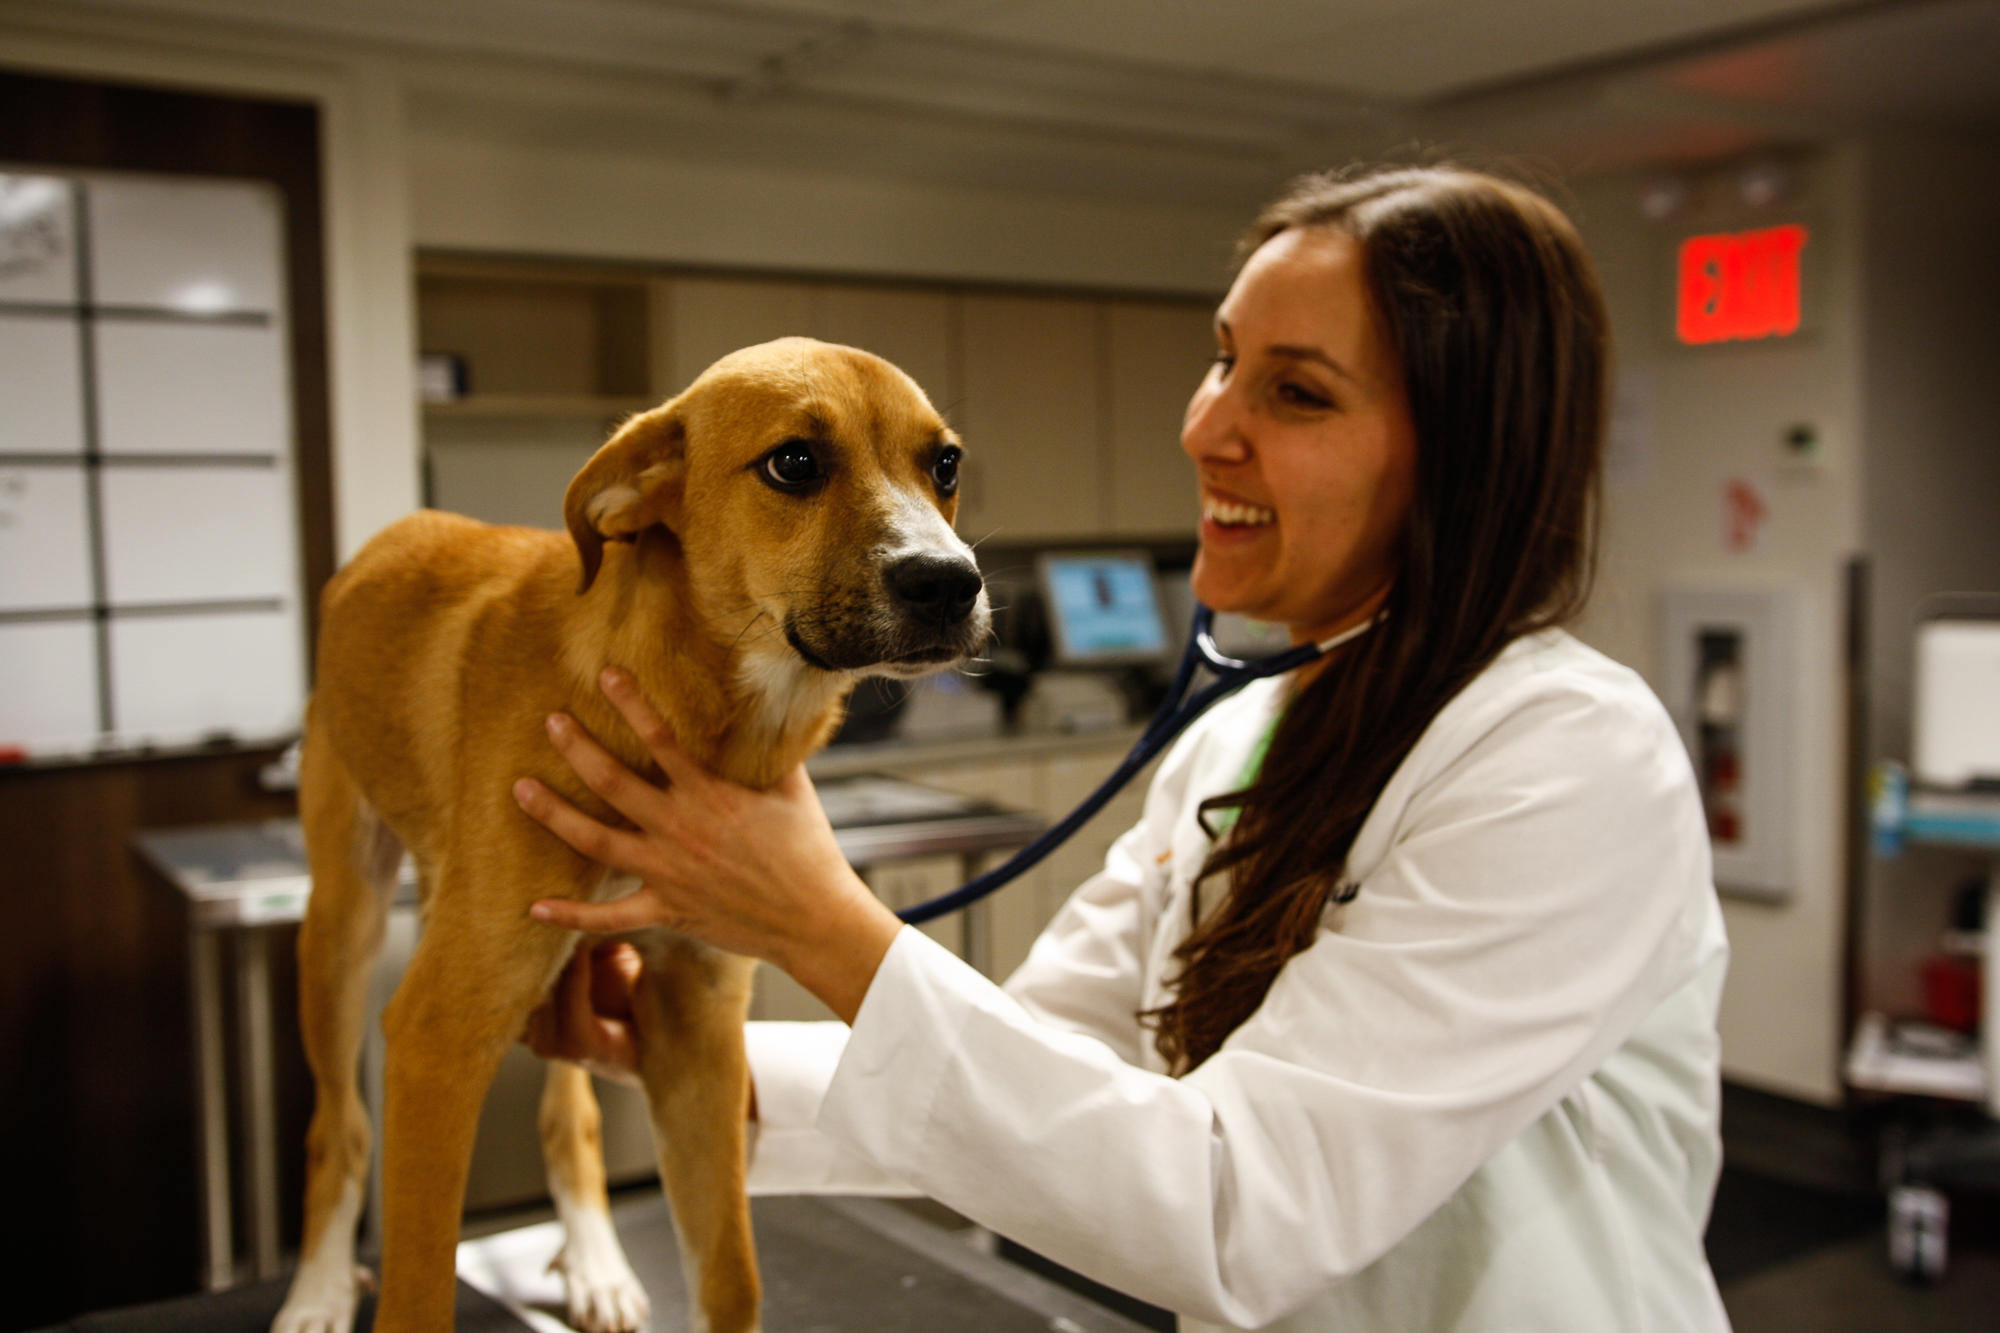 Dr. Stephanie Liff uses a stethoscope to assess this patient’s heart and lungs. If Dr. Liff recognizes any abnormalities, Pure Paws is equipped with advanced imaging technology to provide a prompt and accurate diagnosis.